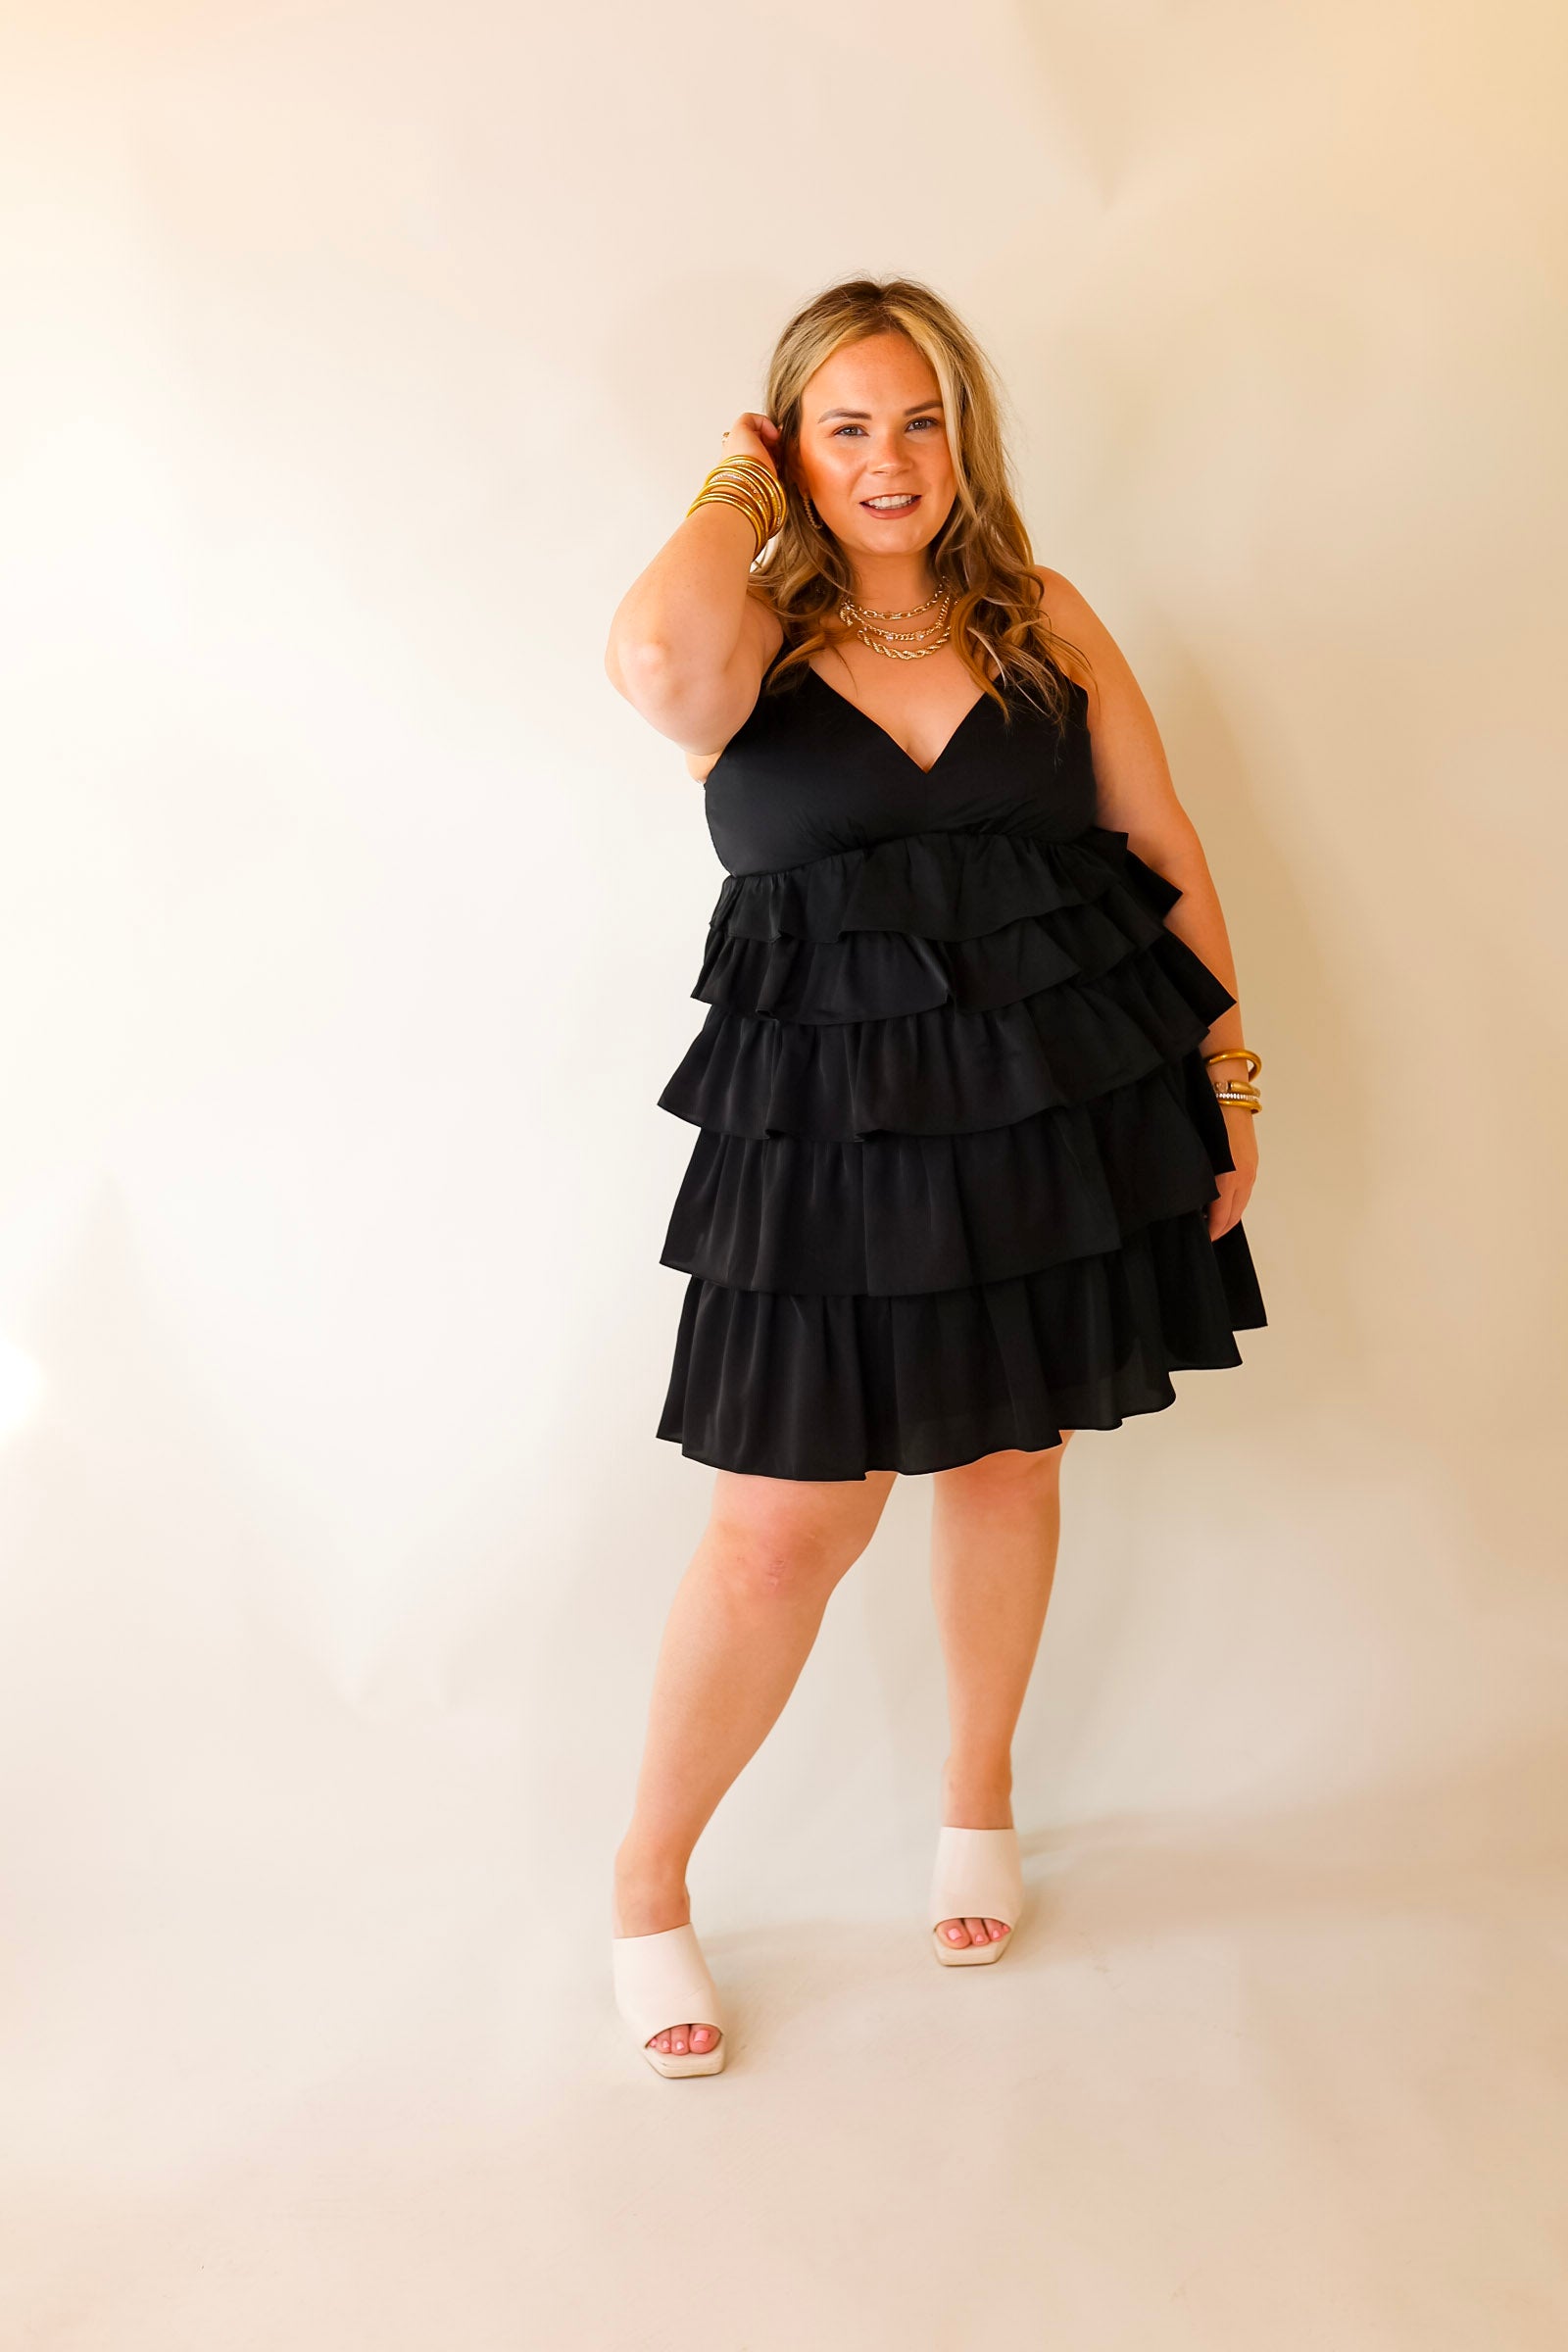 Dare to Dance Ruffled Spaghetti Strap Dress in Black - Giddy Up Glamour Boutique